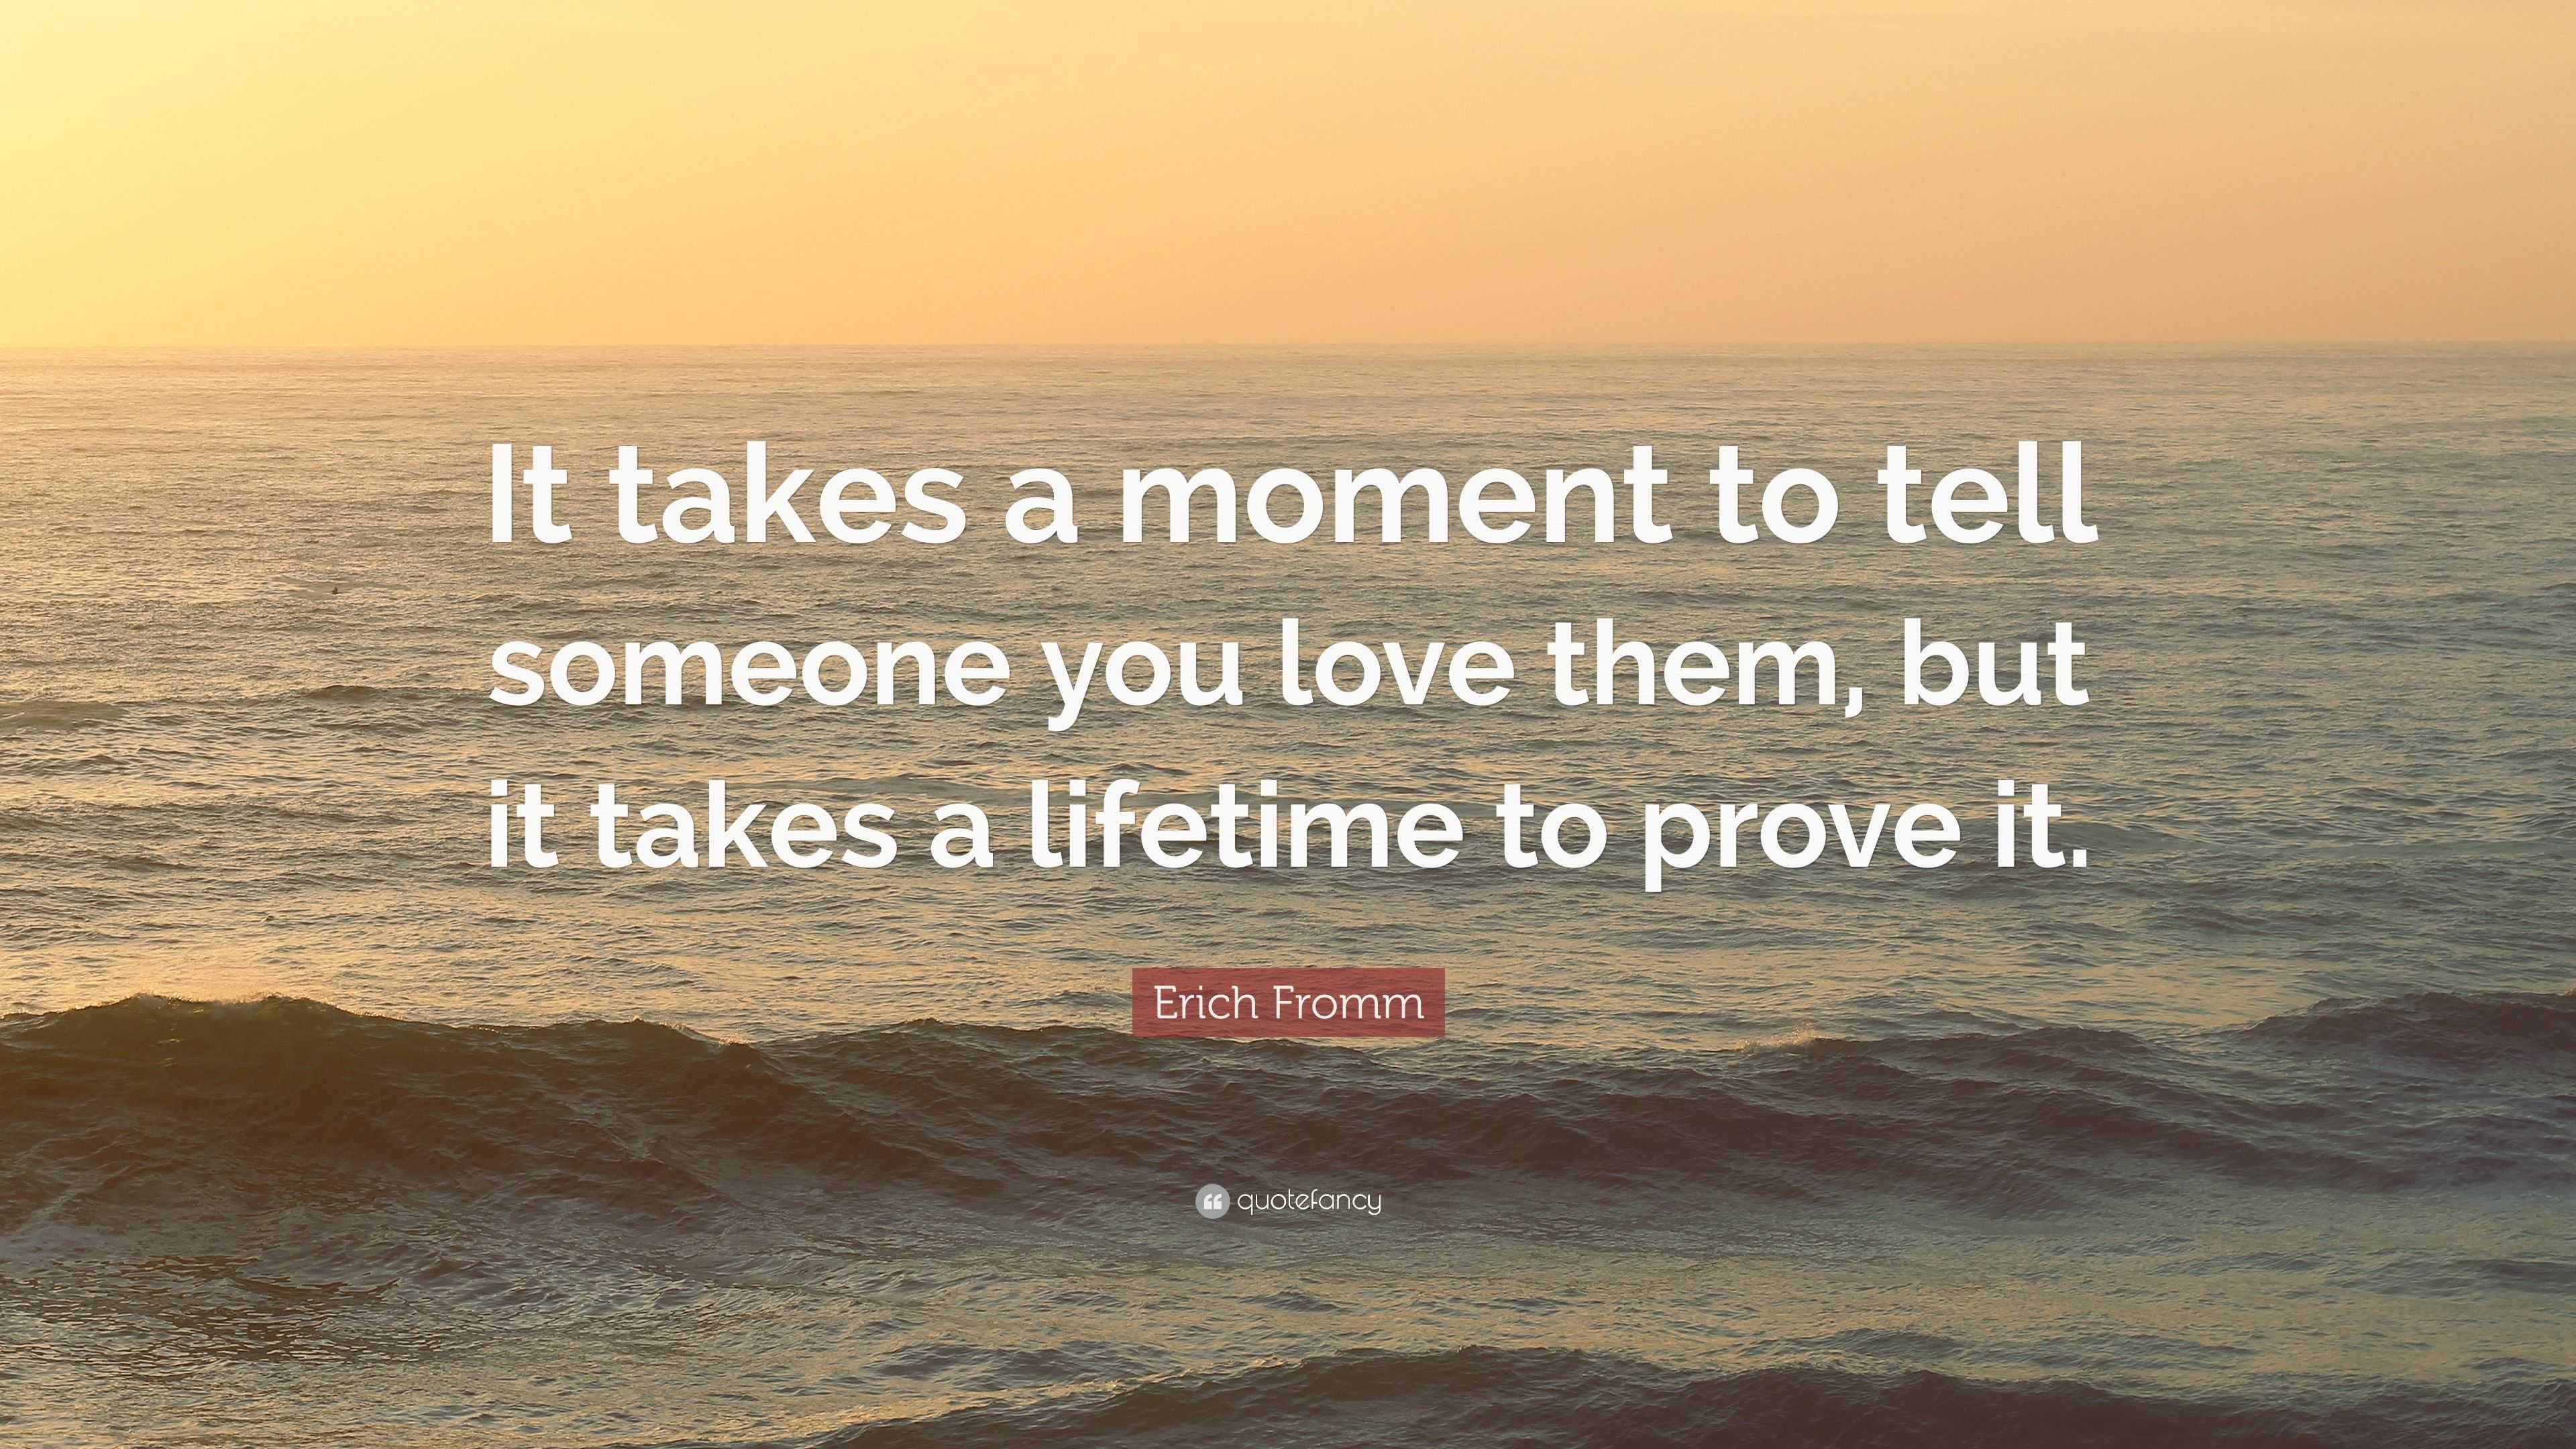 Quotes Telling someone You Love them | Love quotes collection within HD ...